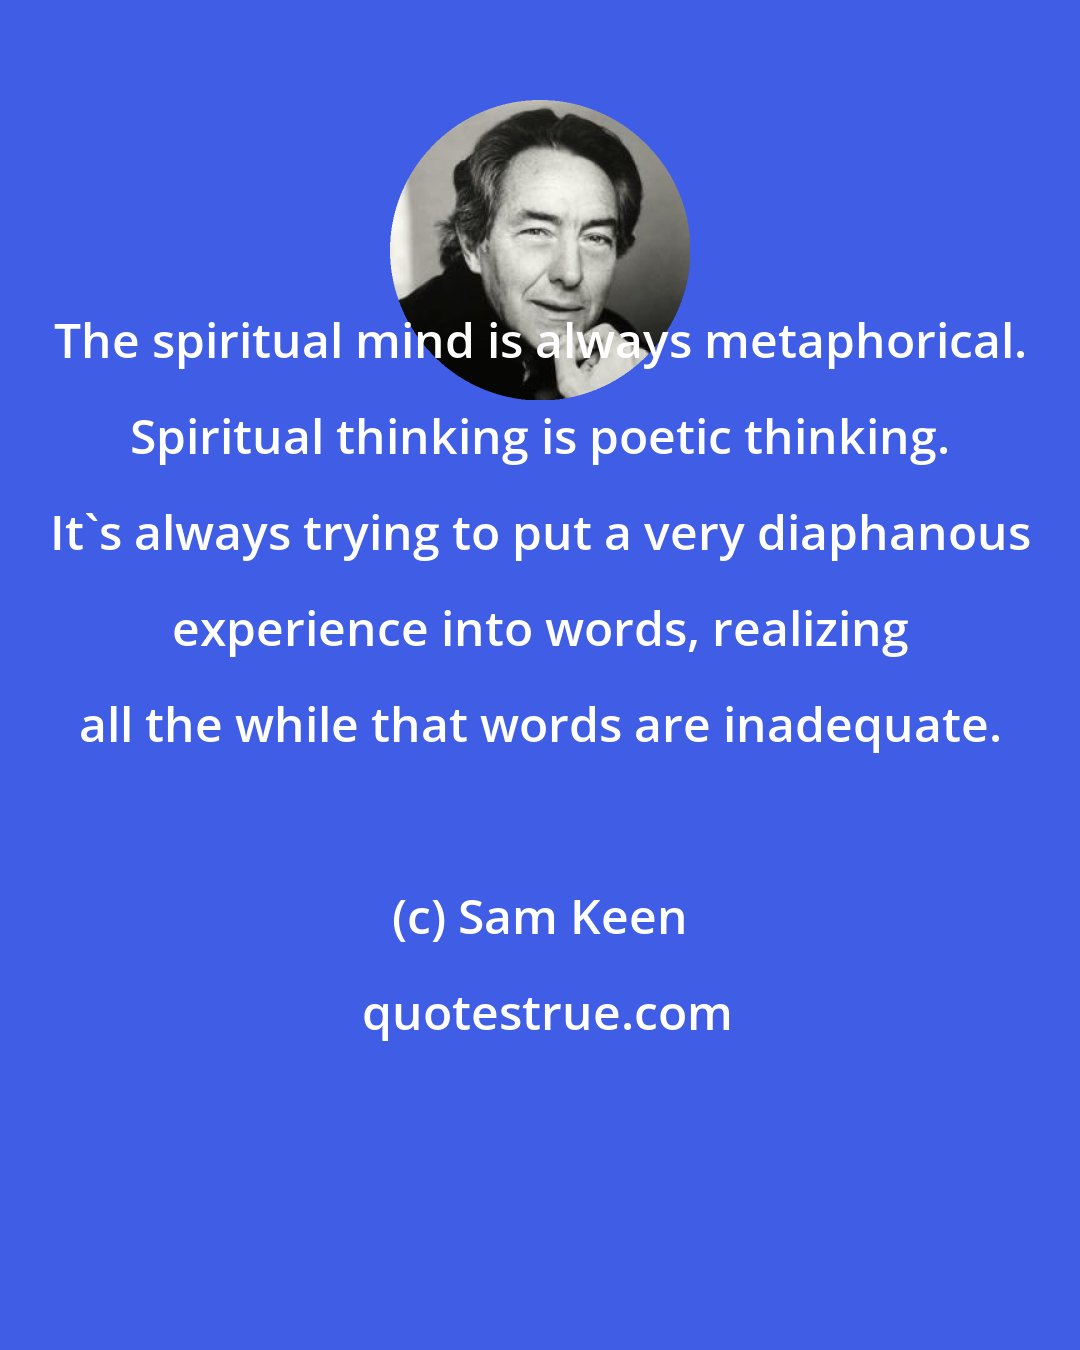 Sam Keen: The spiritual mind is always metaphorical. Spiritual thinking is poetic thinking. It's always trying to put a very diaphanous experience into words, realizing all the while that words are inadequate.